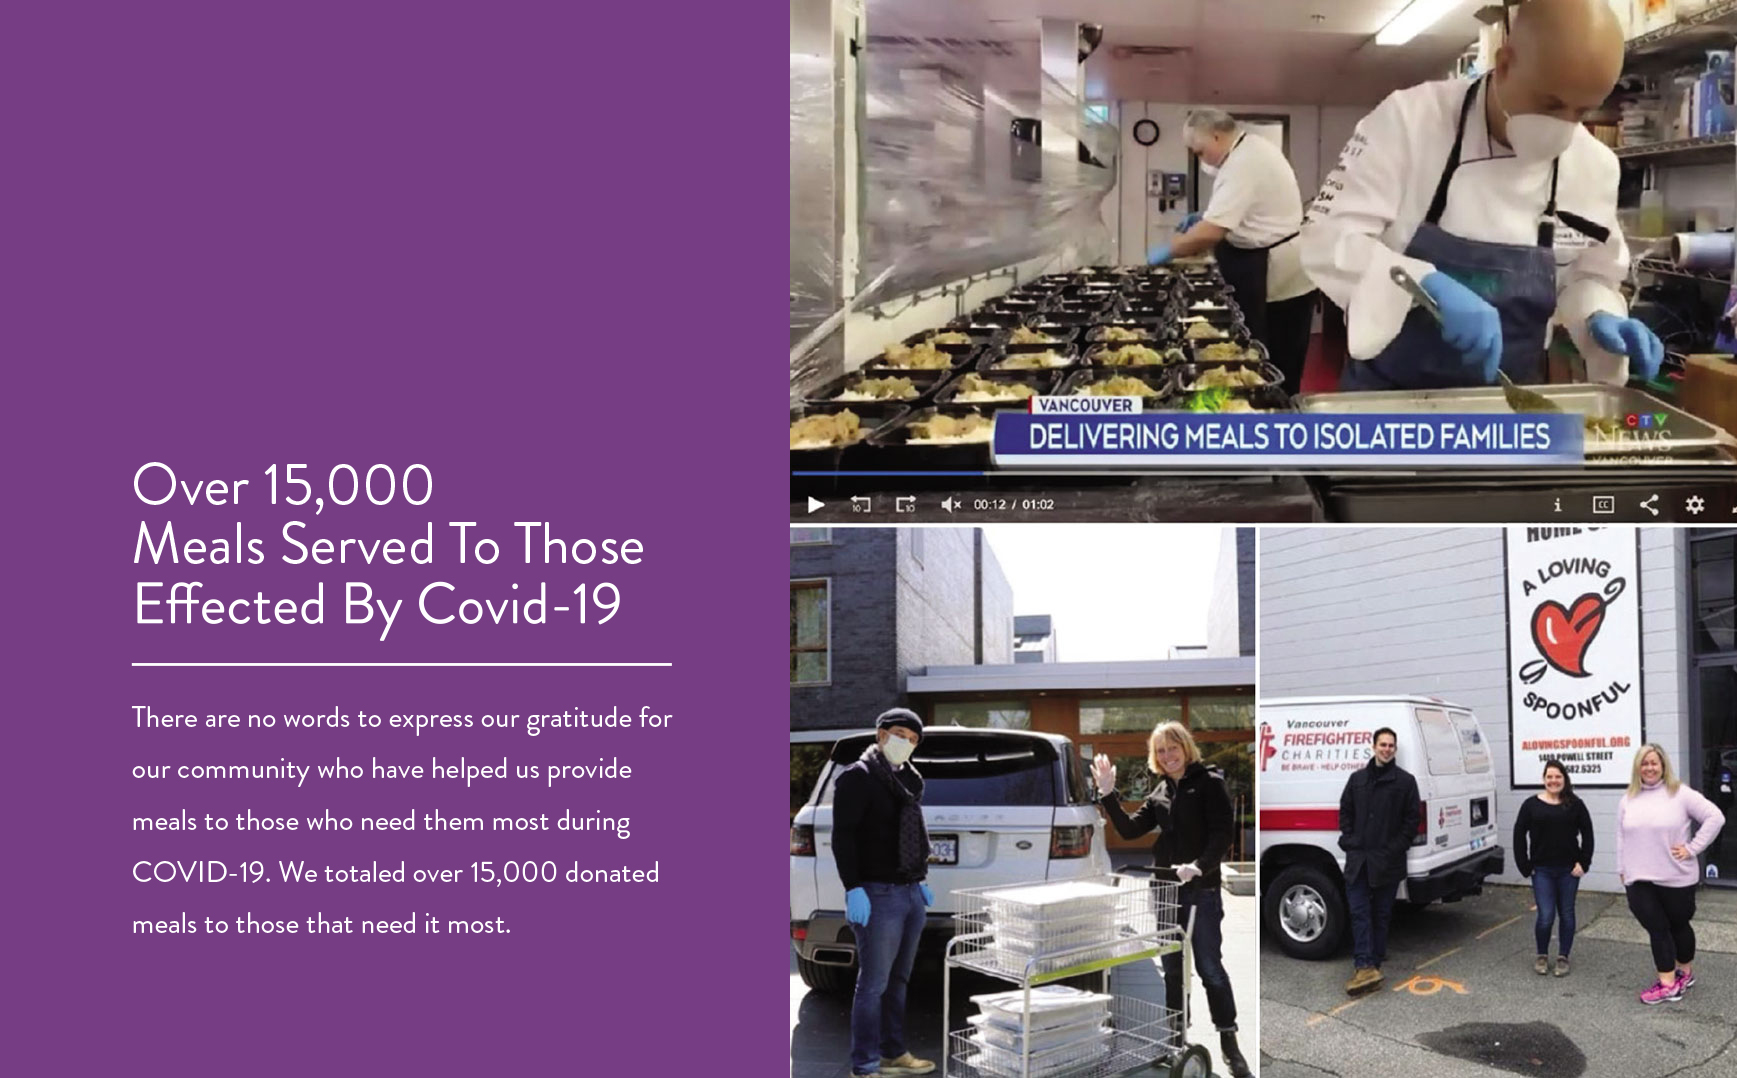 There are no words to express our gratitude for our community who have helped us provide meals to those who need them most during COVID-19. We totaled over 12,000 donated meals to those that need it most. 